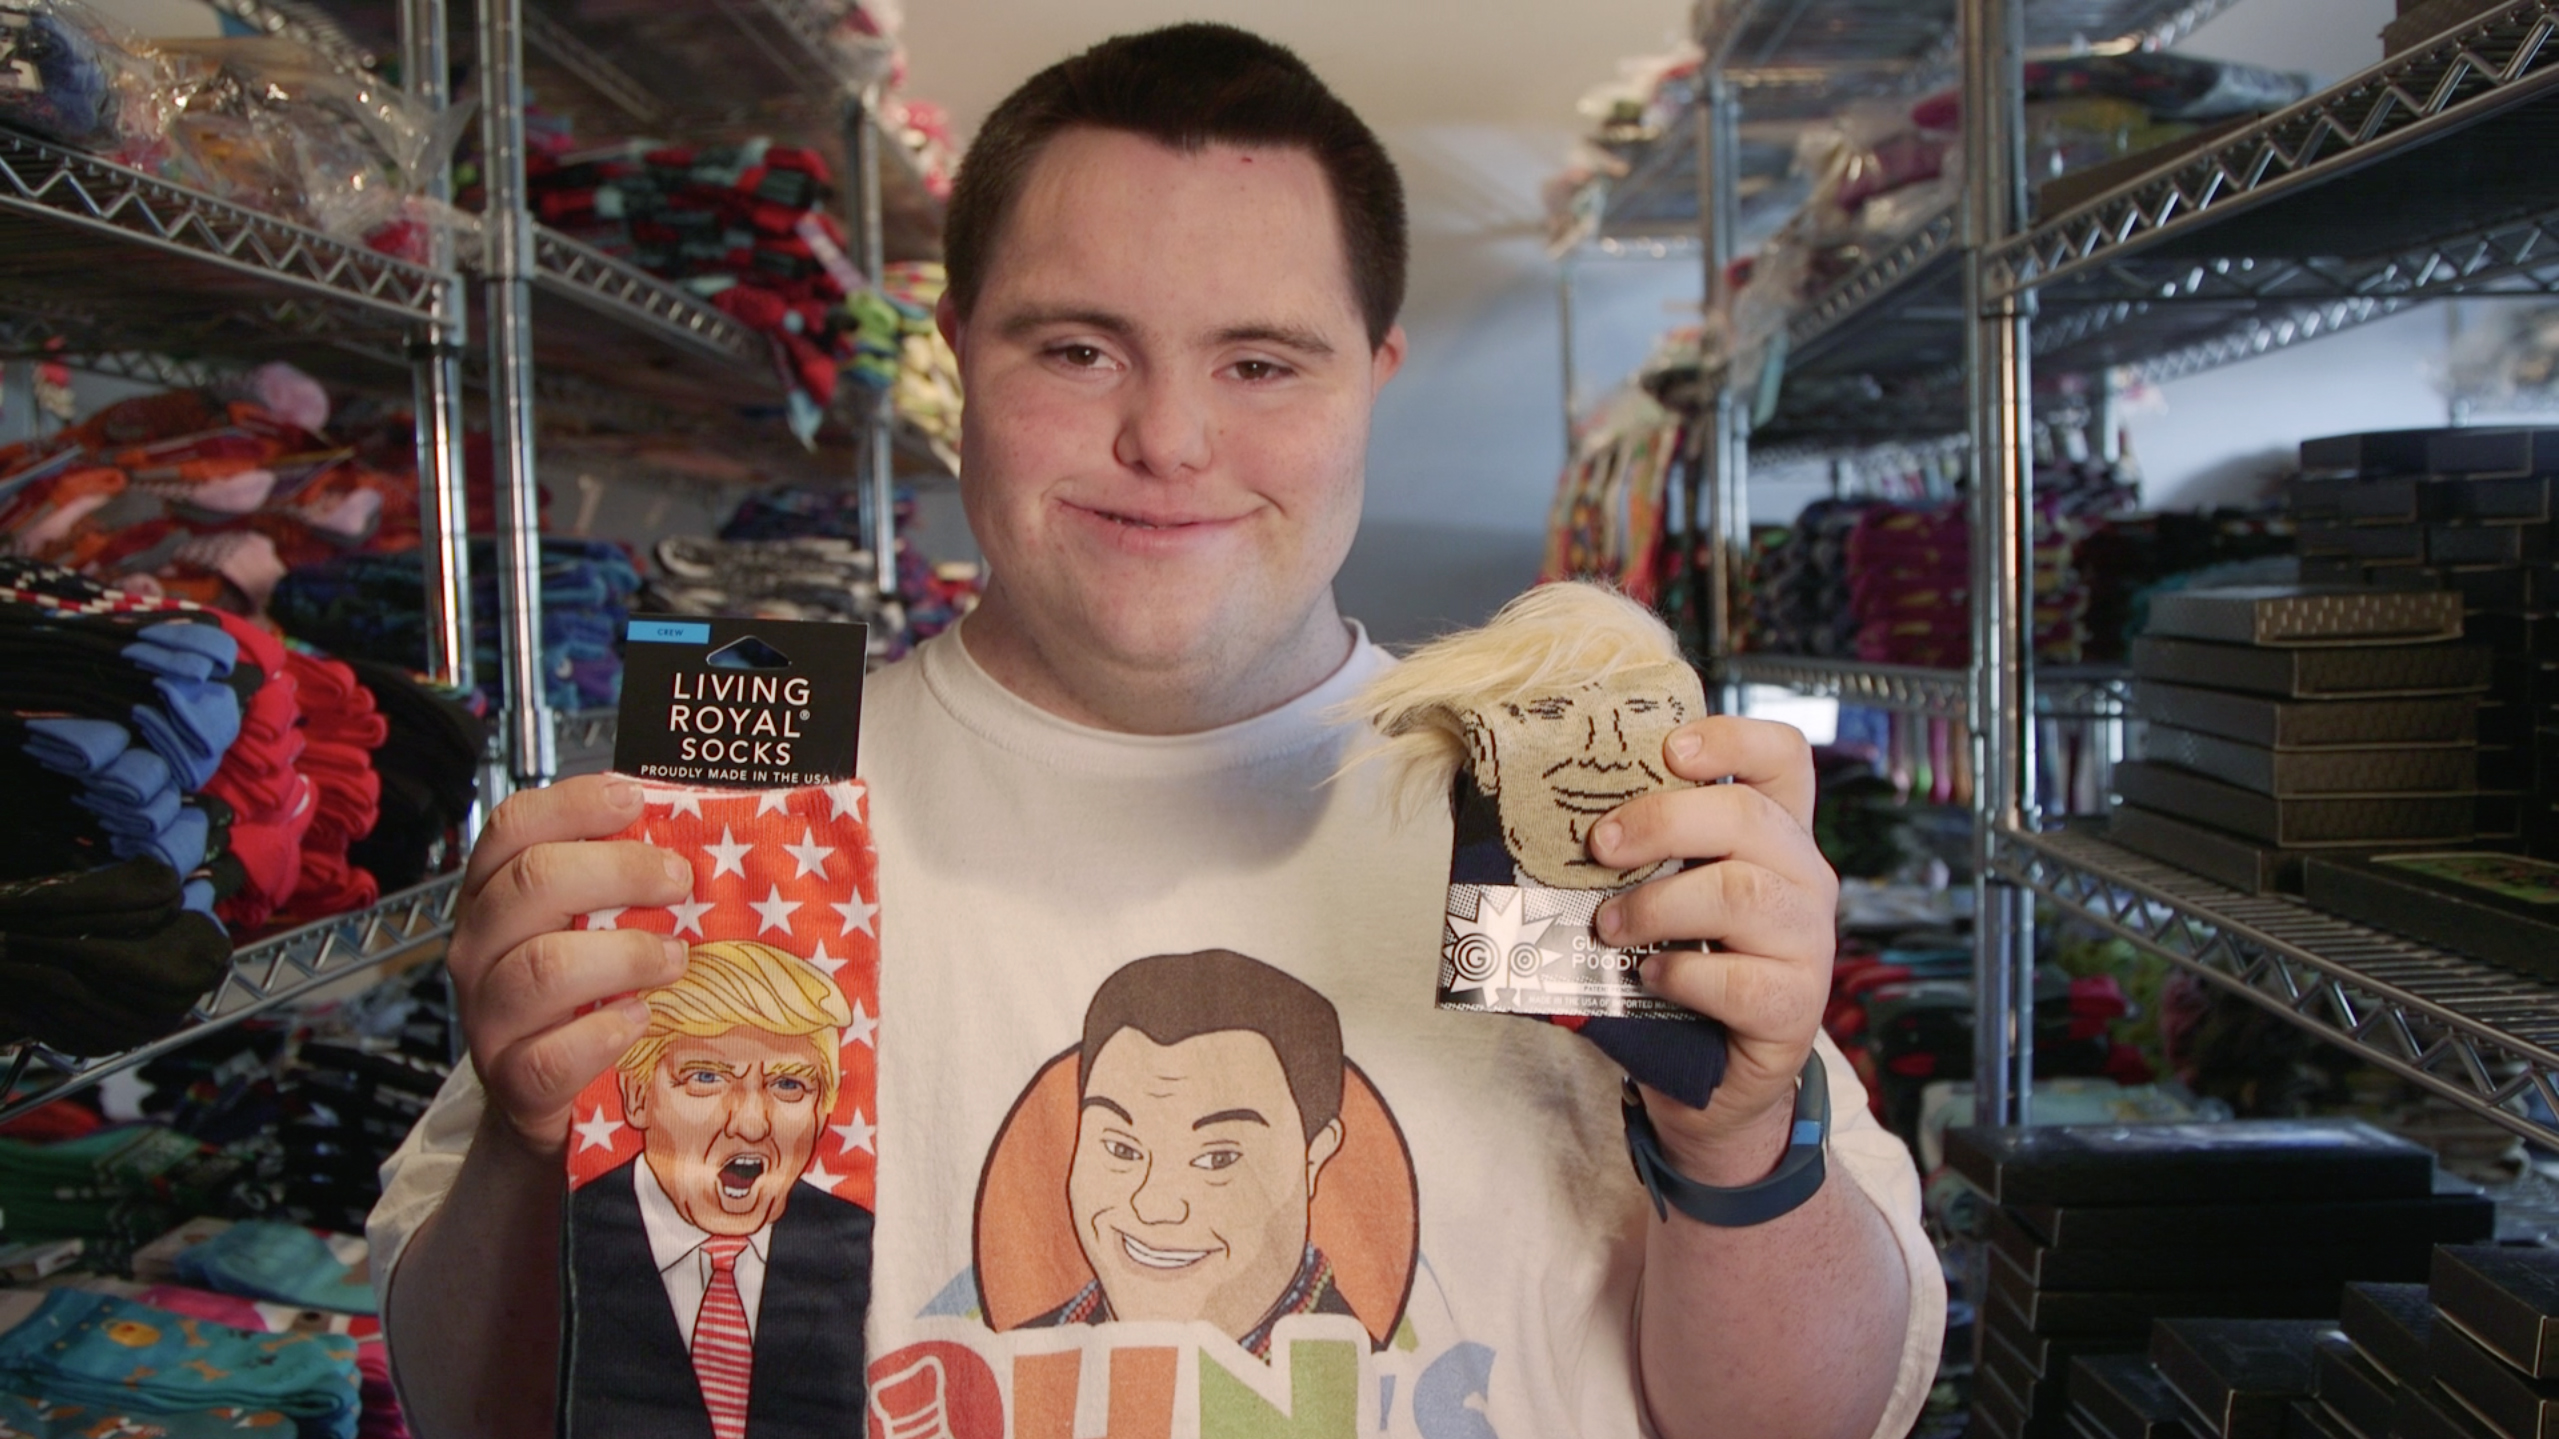 How This 21-Year-Old With Down Syndrome Is Making Six Figures Selling Socks